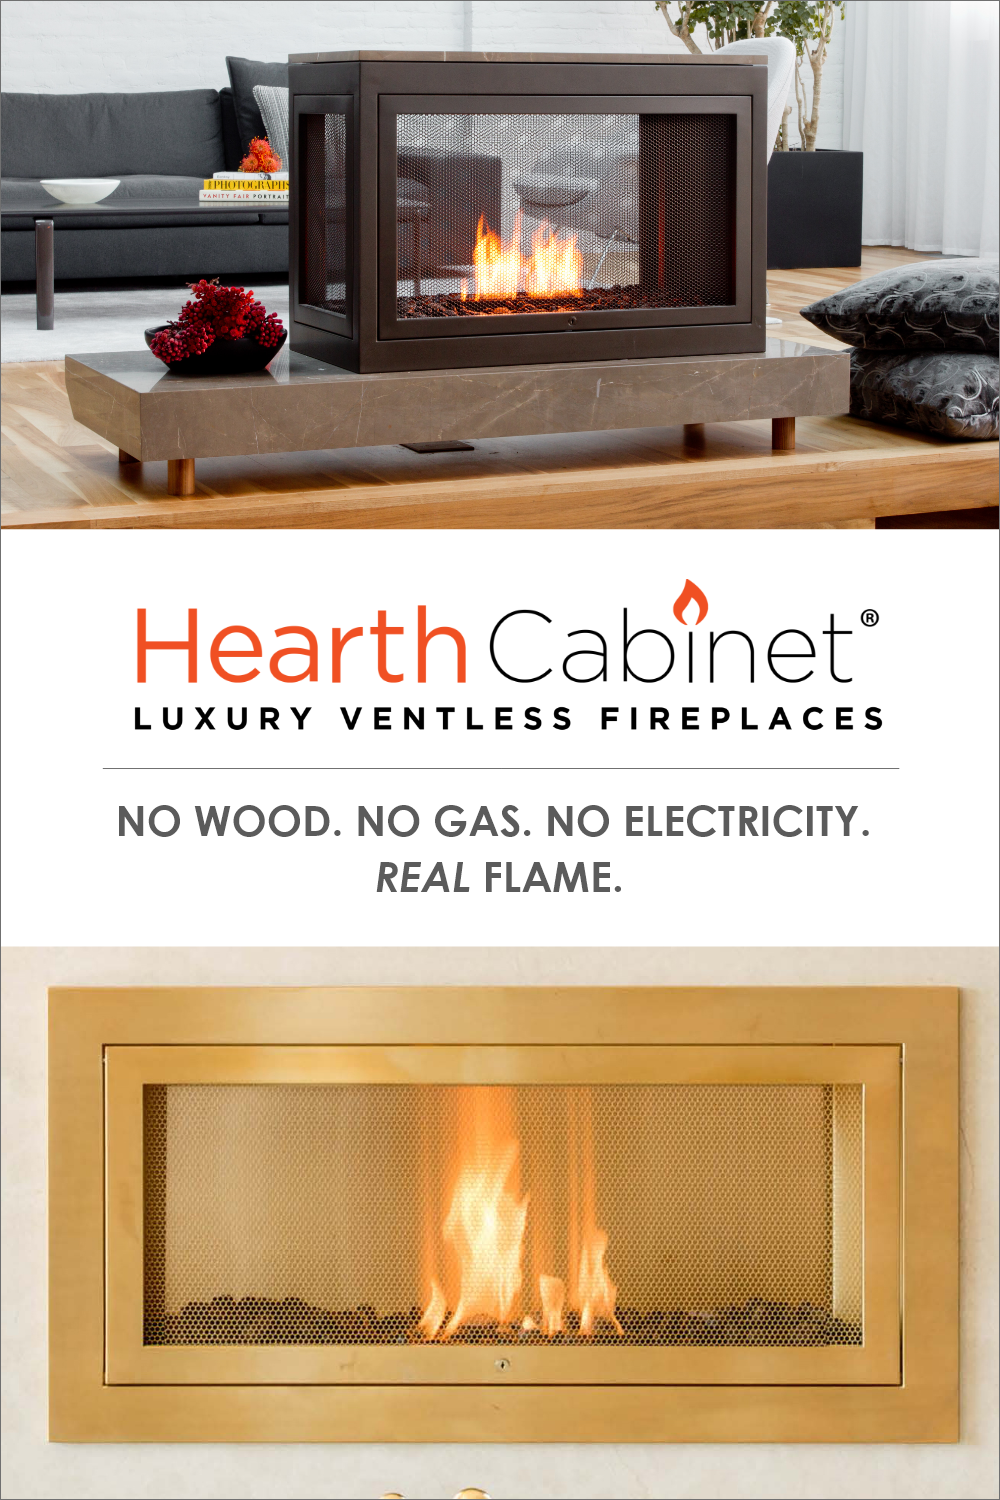 Fireplace Safety Beautiful 171 Best Residential Images In 2019